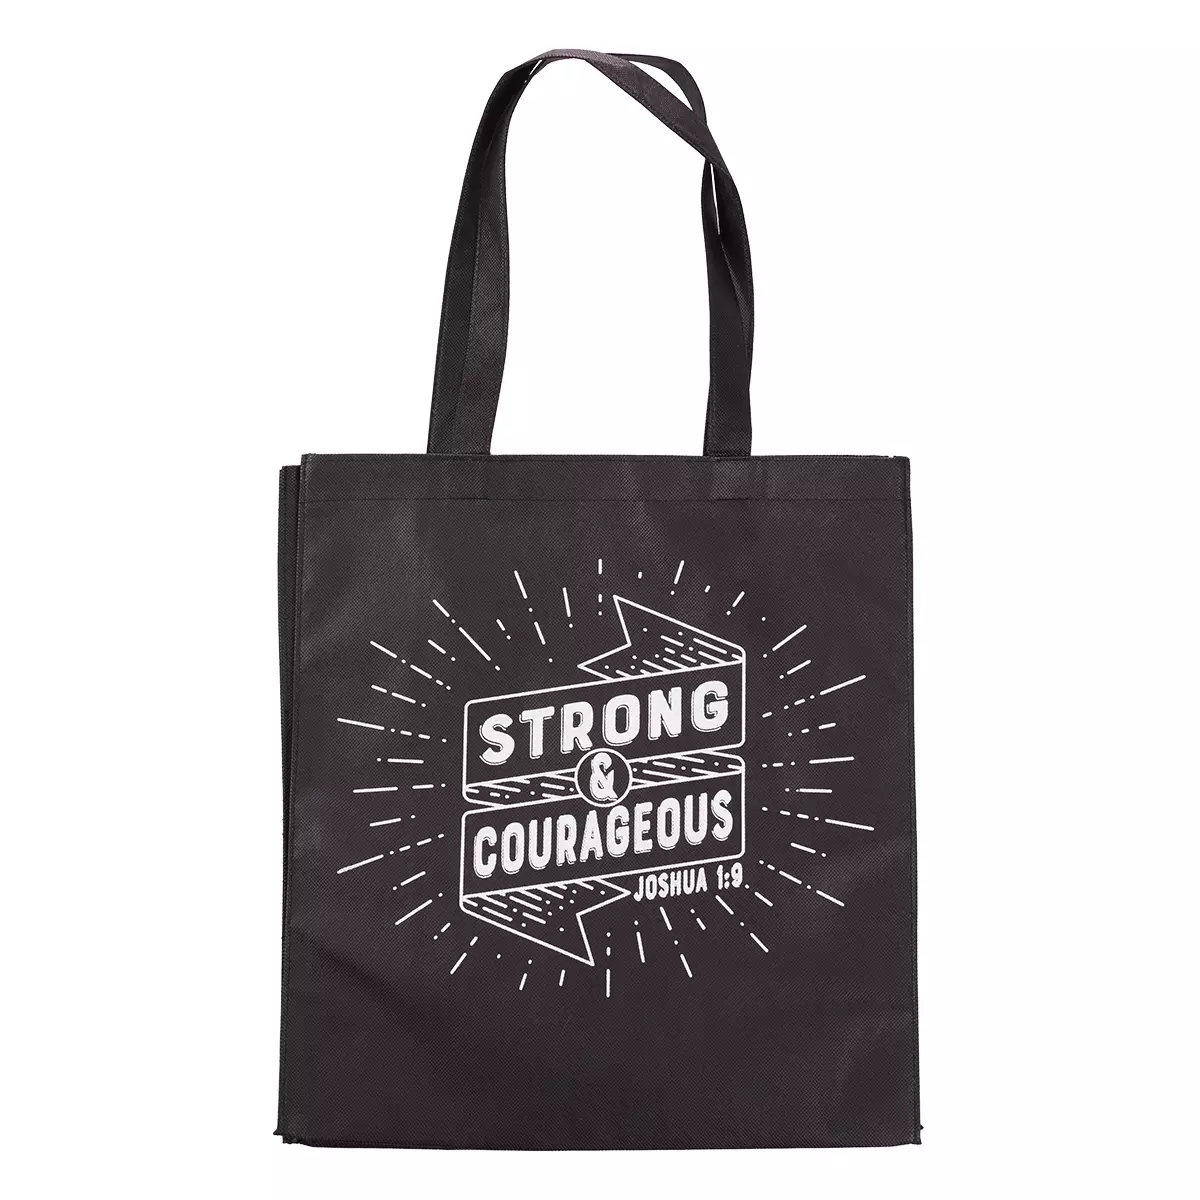 Tote Black Strong & Courageous Josh. 1:9